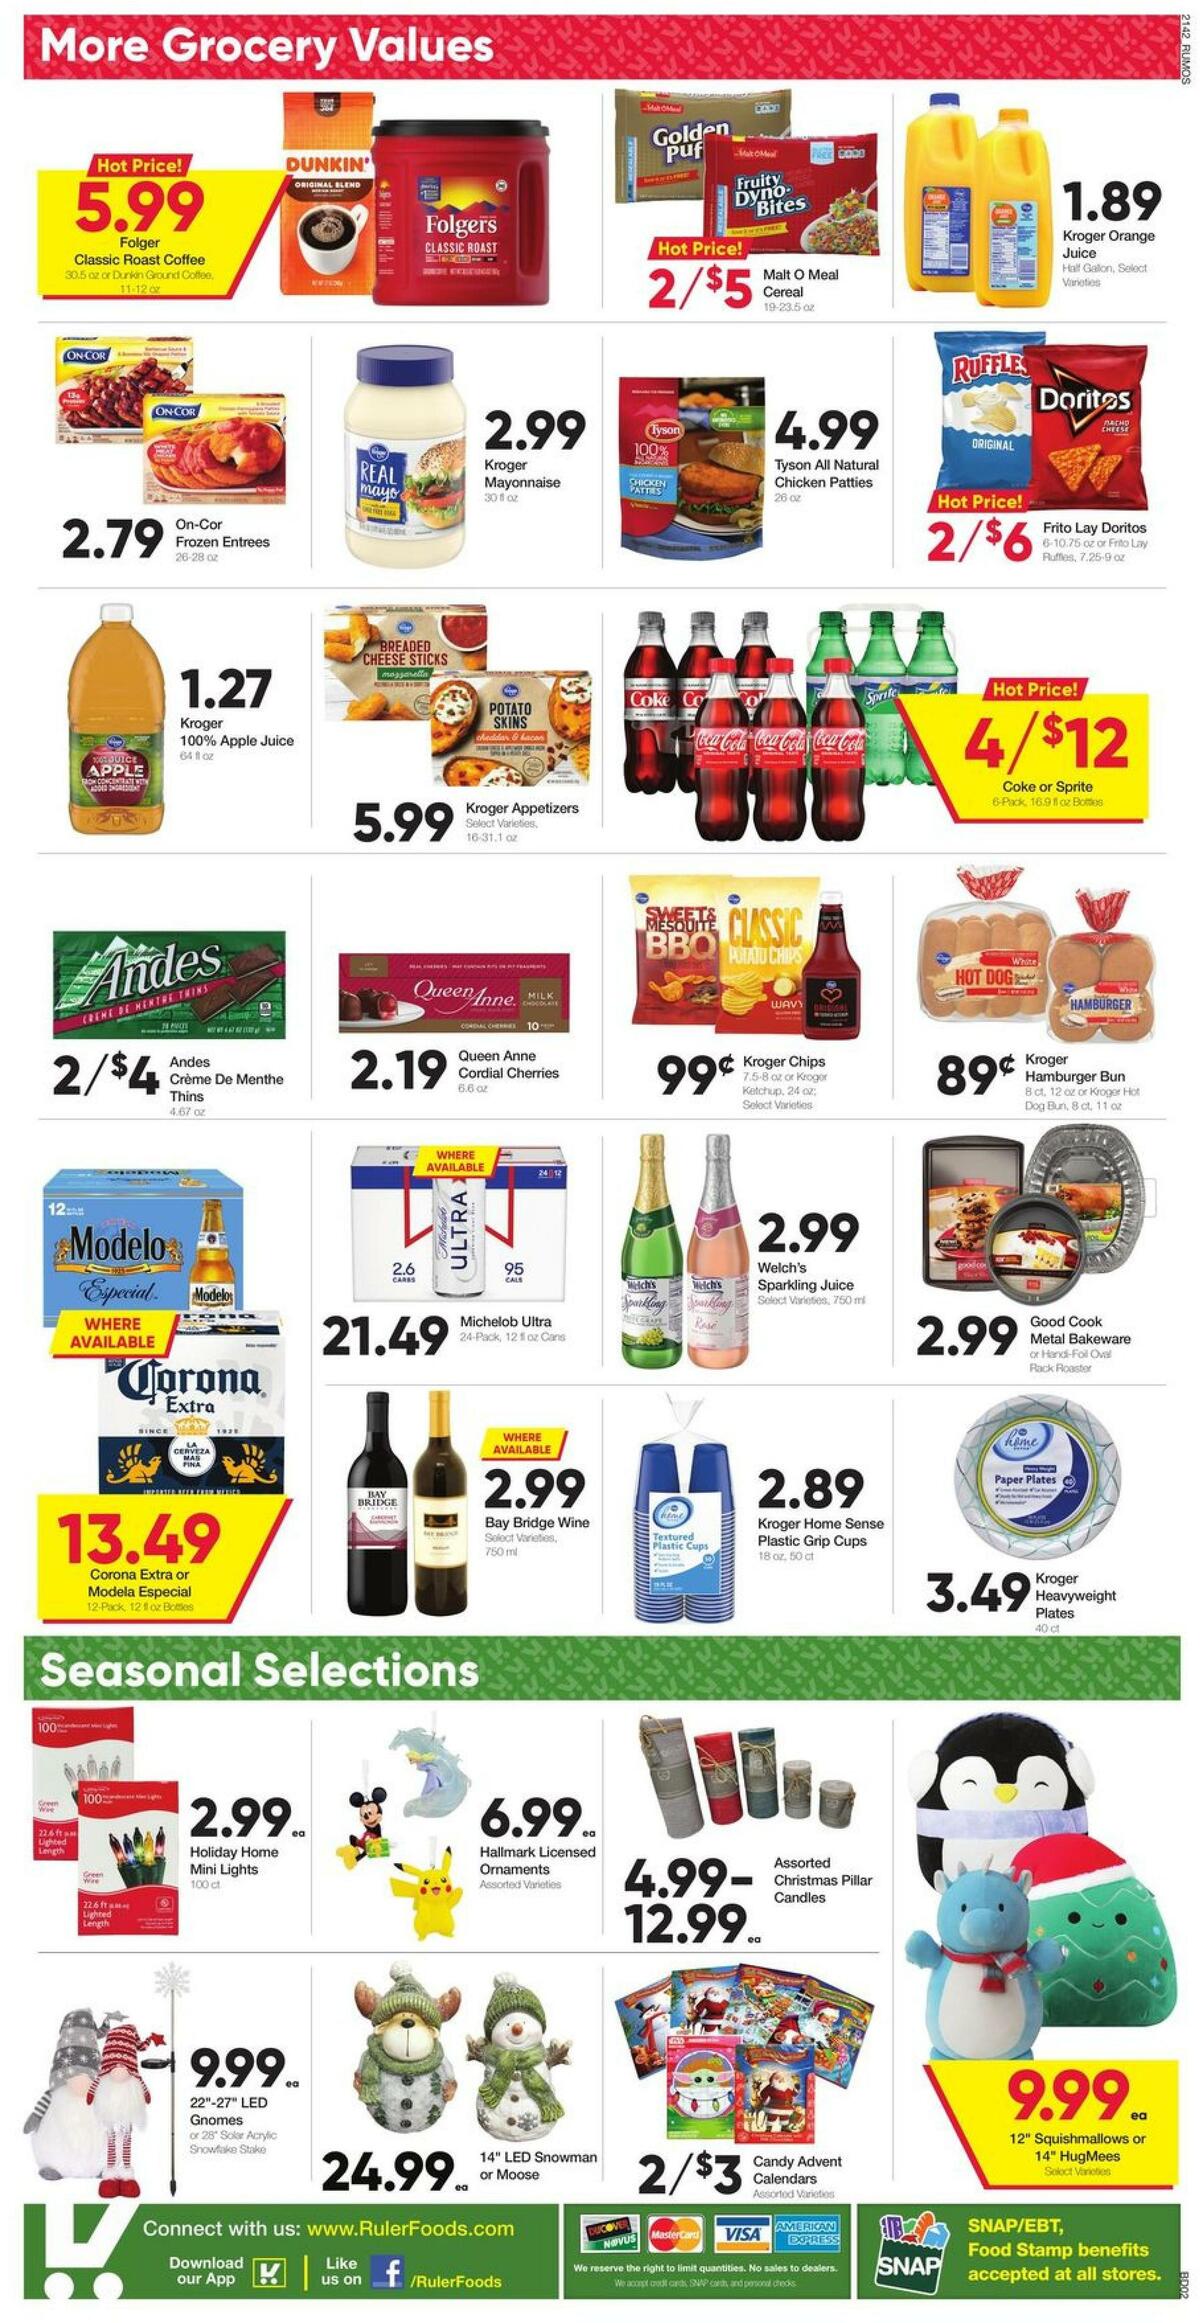 Ruler Foods Weekly Ad from November 17